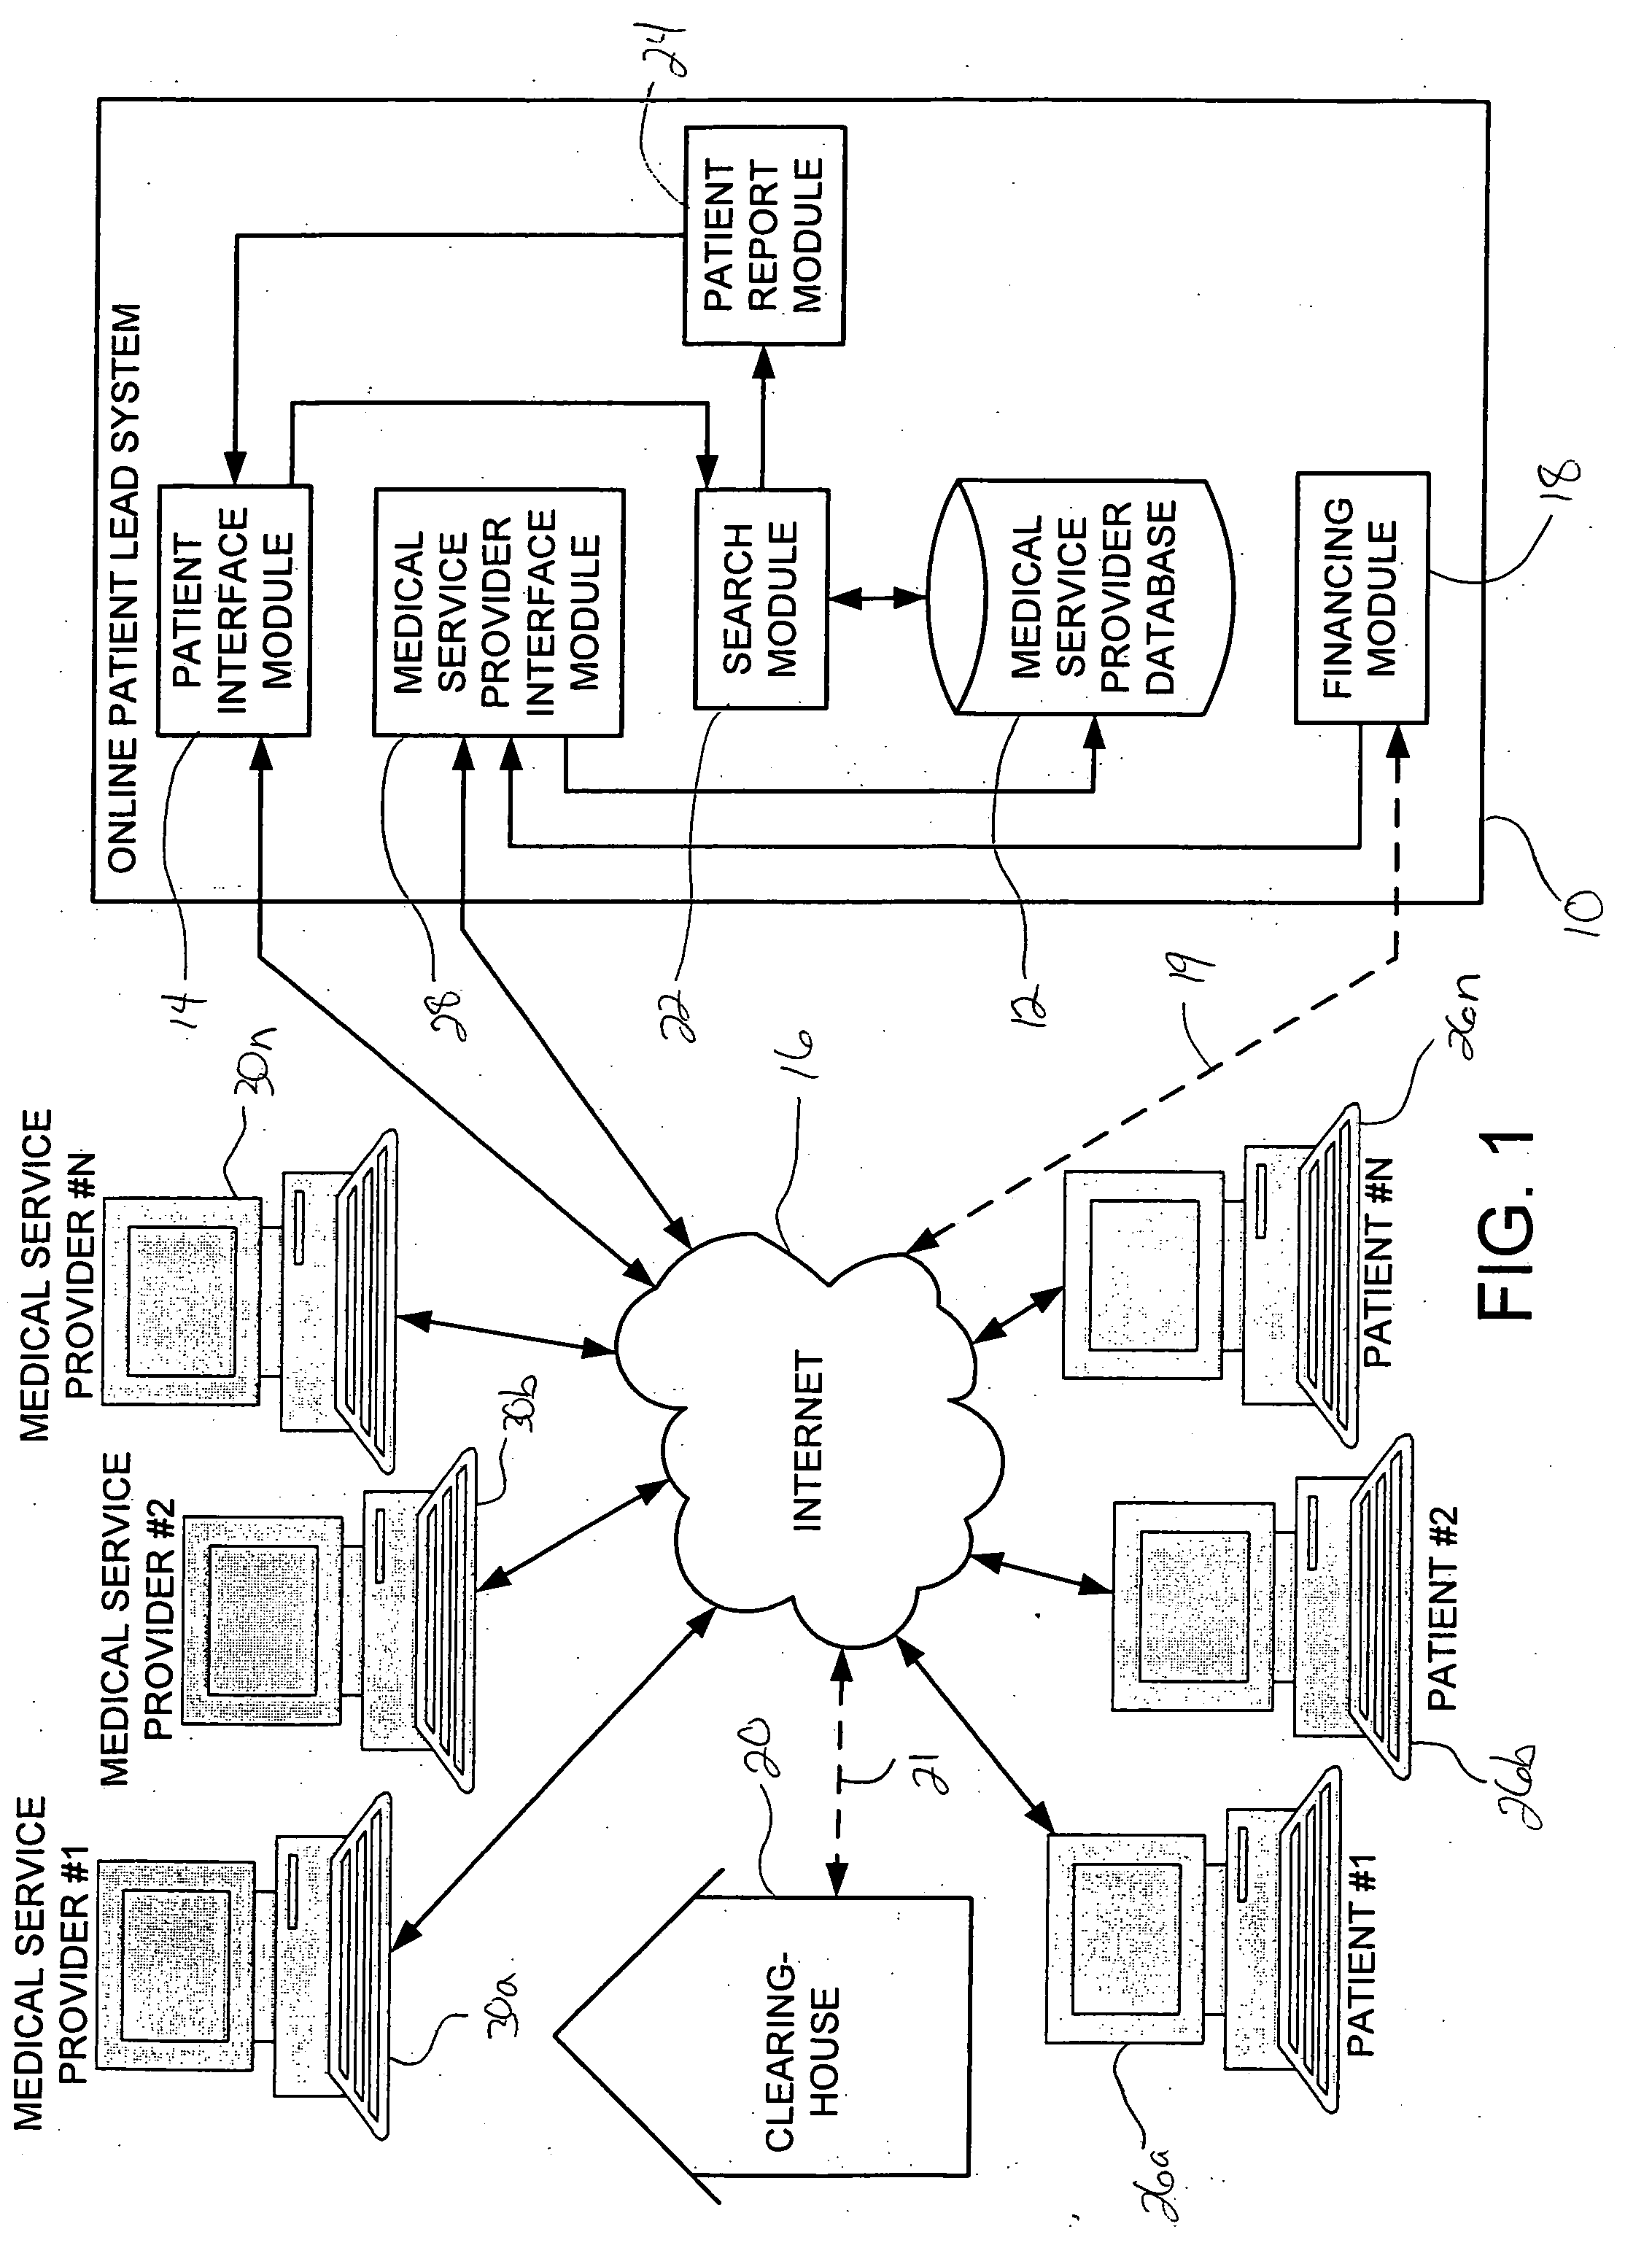 Online doctor/patient lead system and associated methods